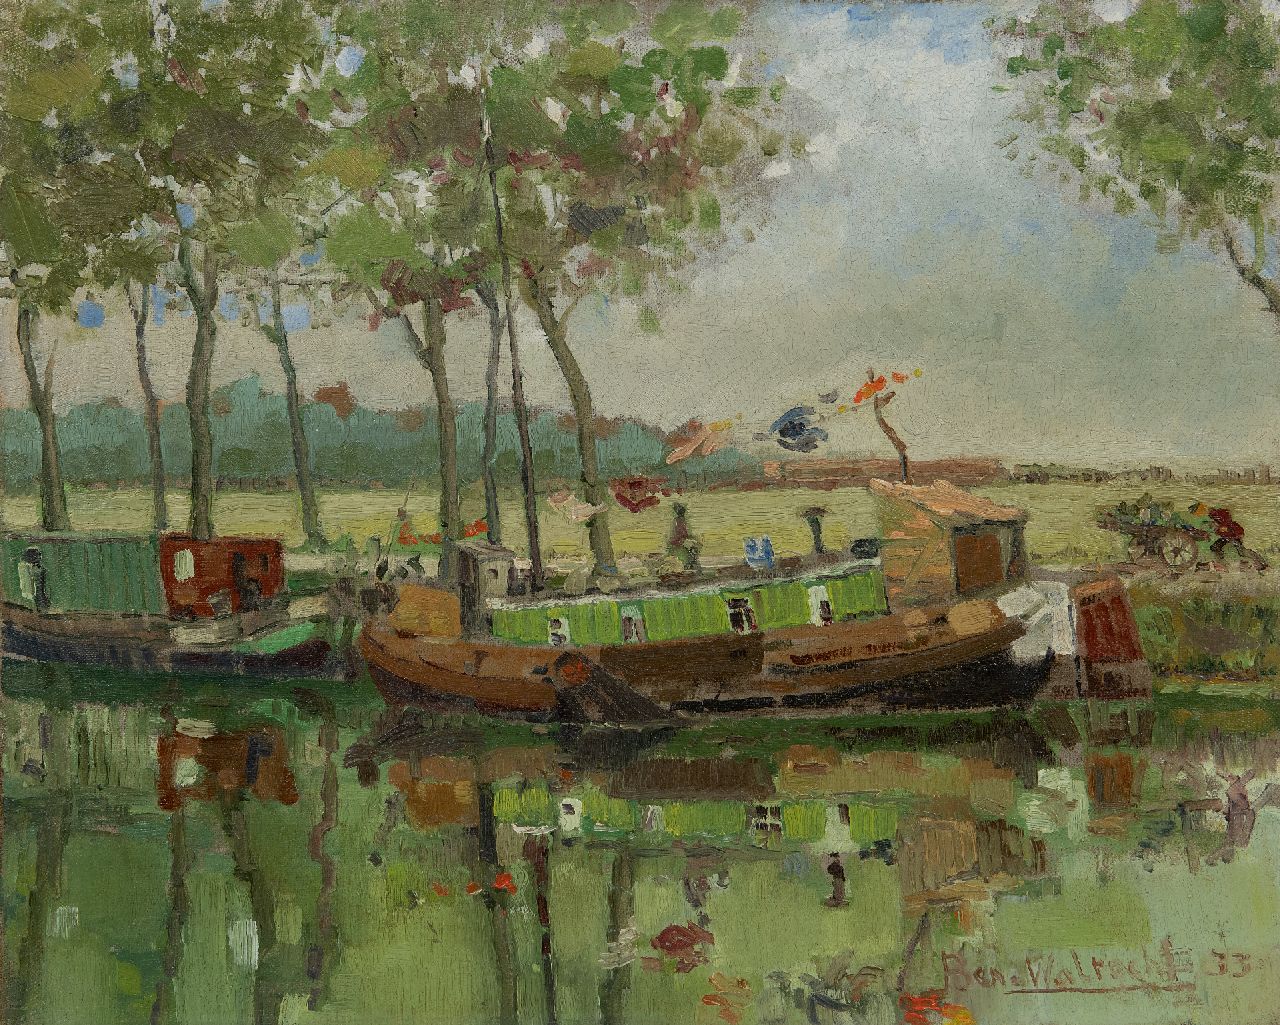 Ben Walrecht | At Oldehove, oil on canvas laid down on panel, 40.4 x 50.0 cm, signed l.r. and dated '33